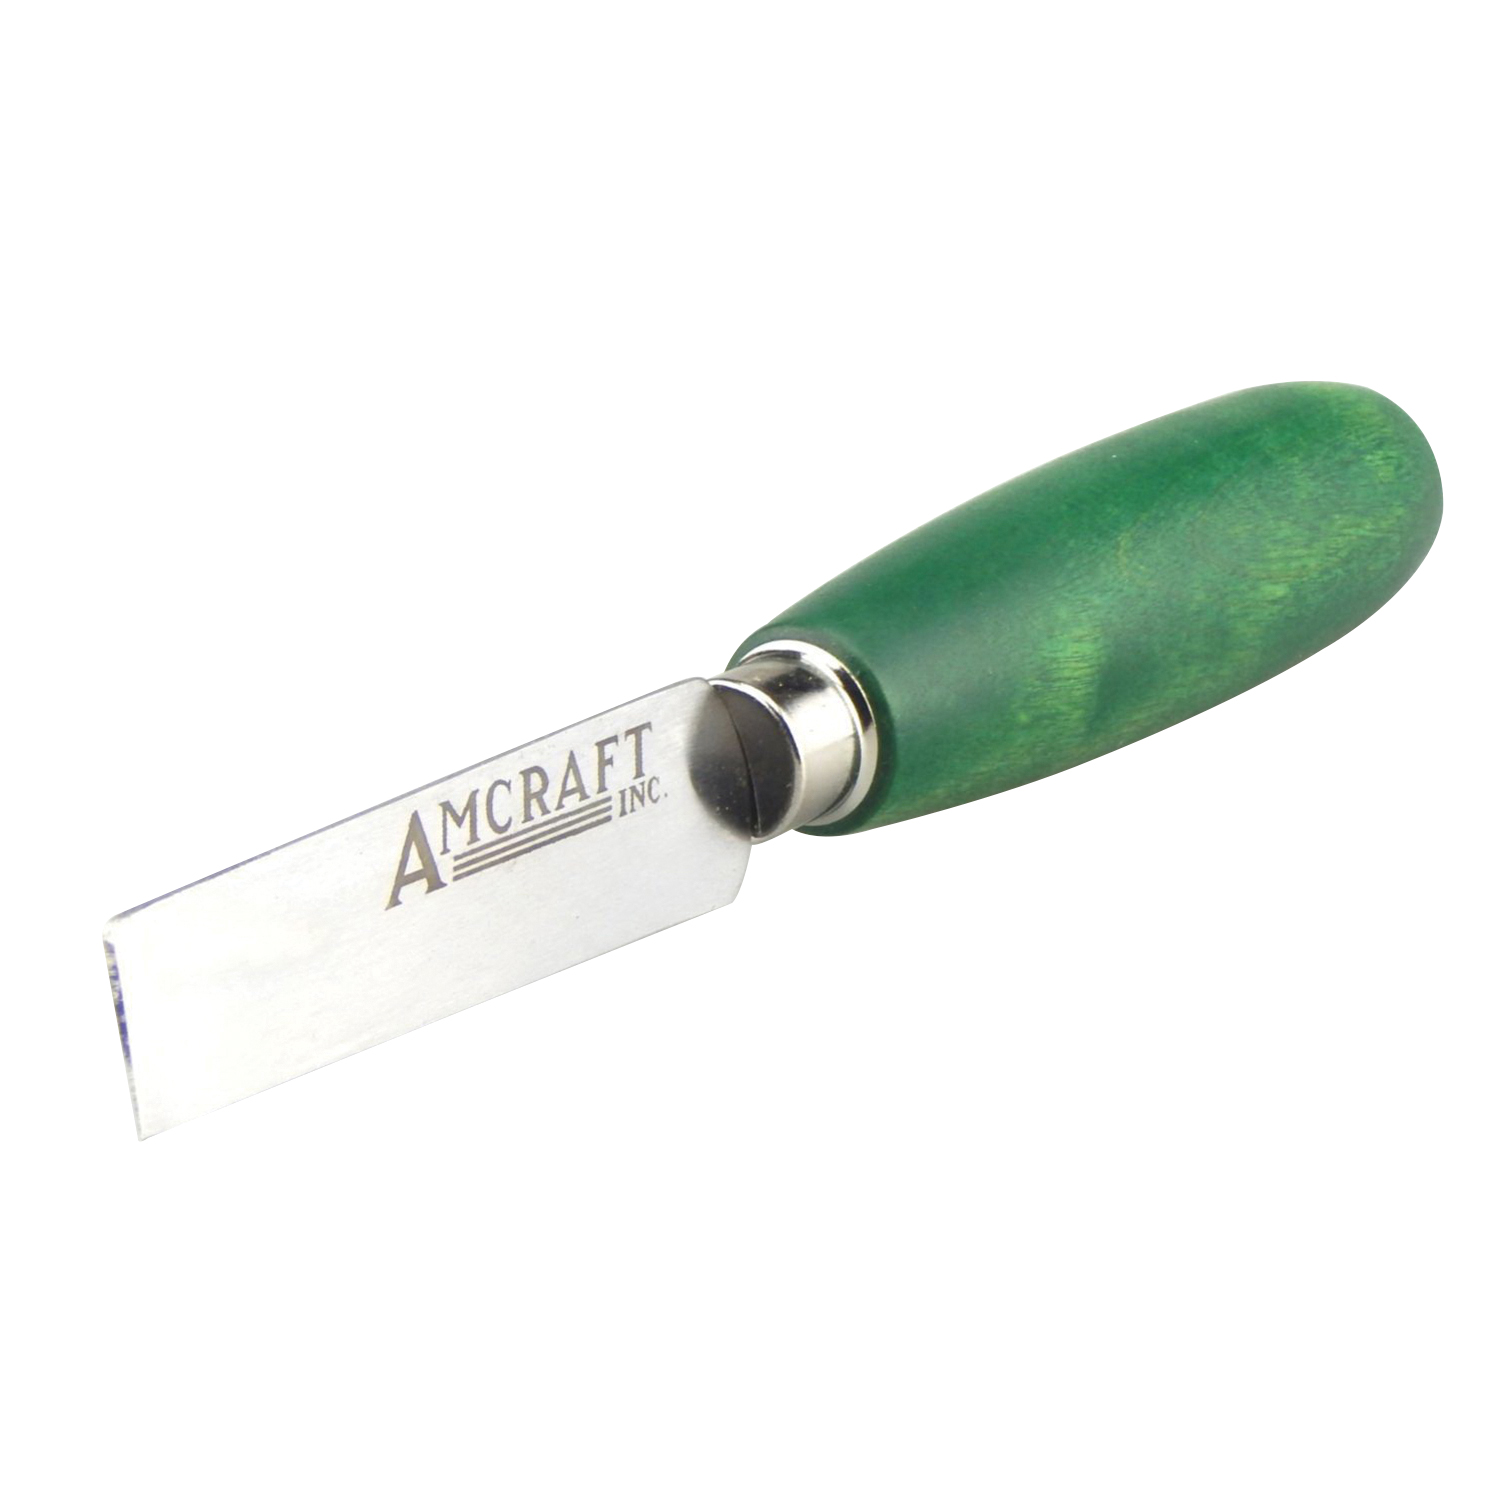 Amcraft® 8000 Duct Knife, 3-1/2 in L Blade, 9-1/8 in OAL